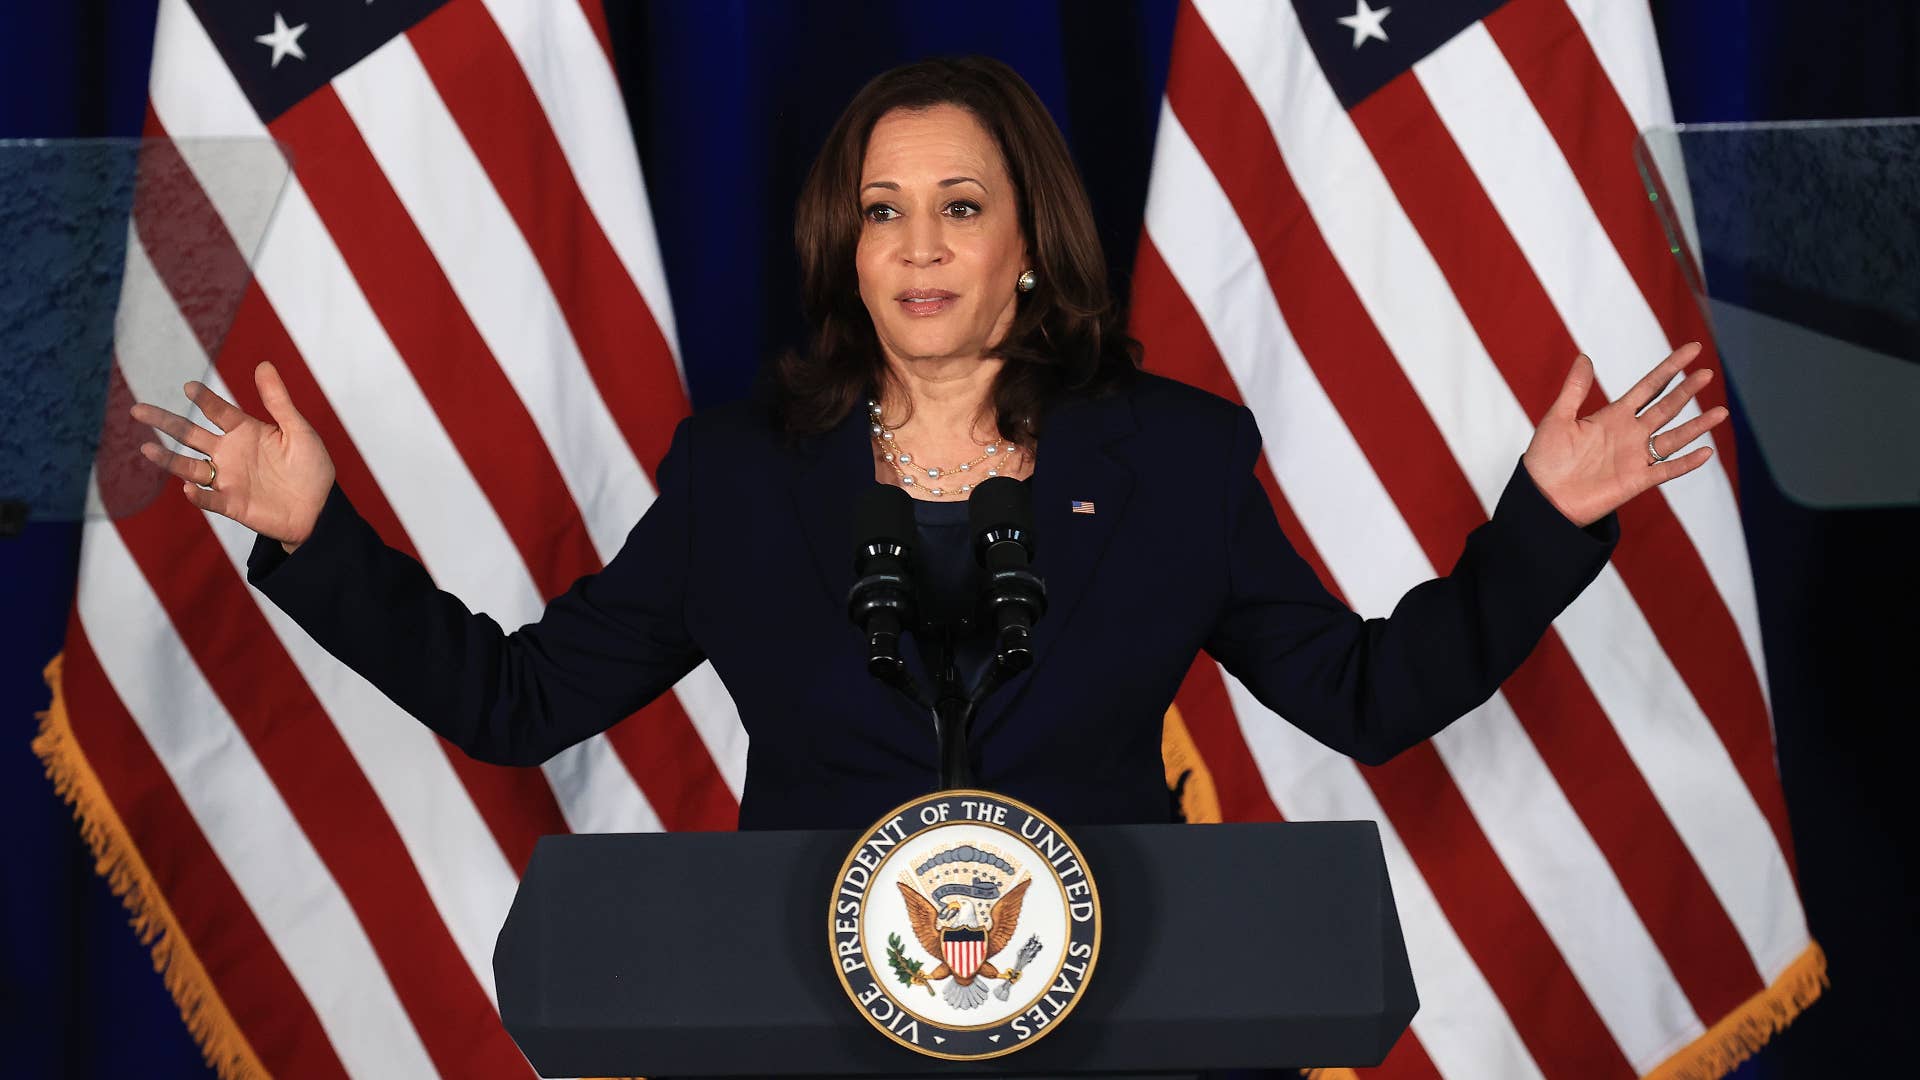 U.S. Vice President Kamala Harris delivers remarks at the Louis Stokes Library.